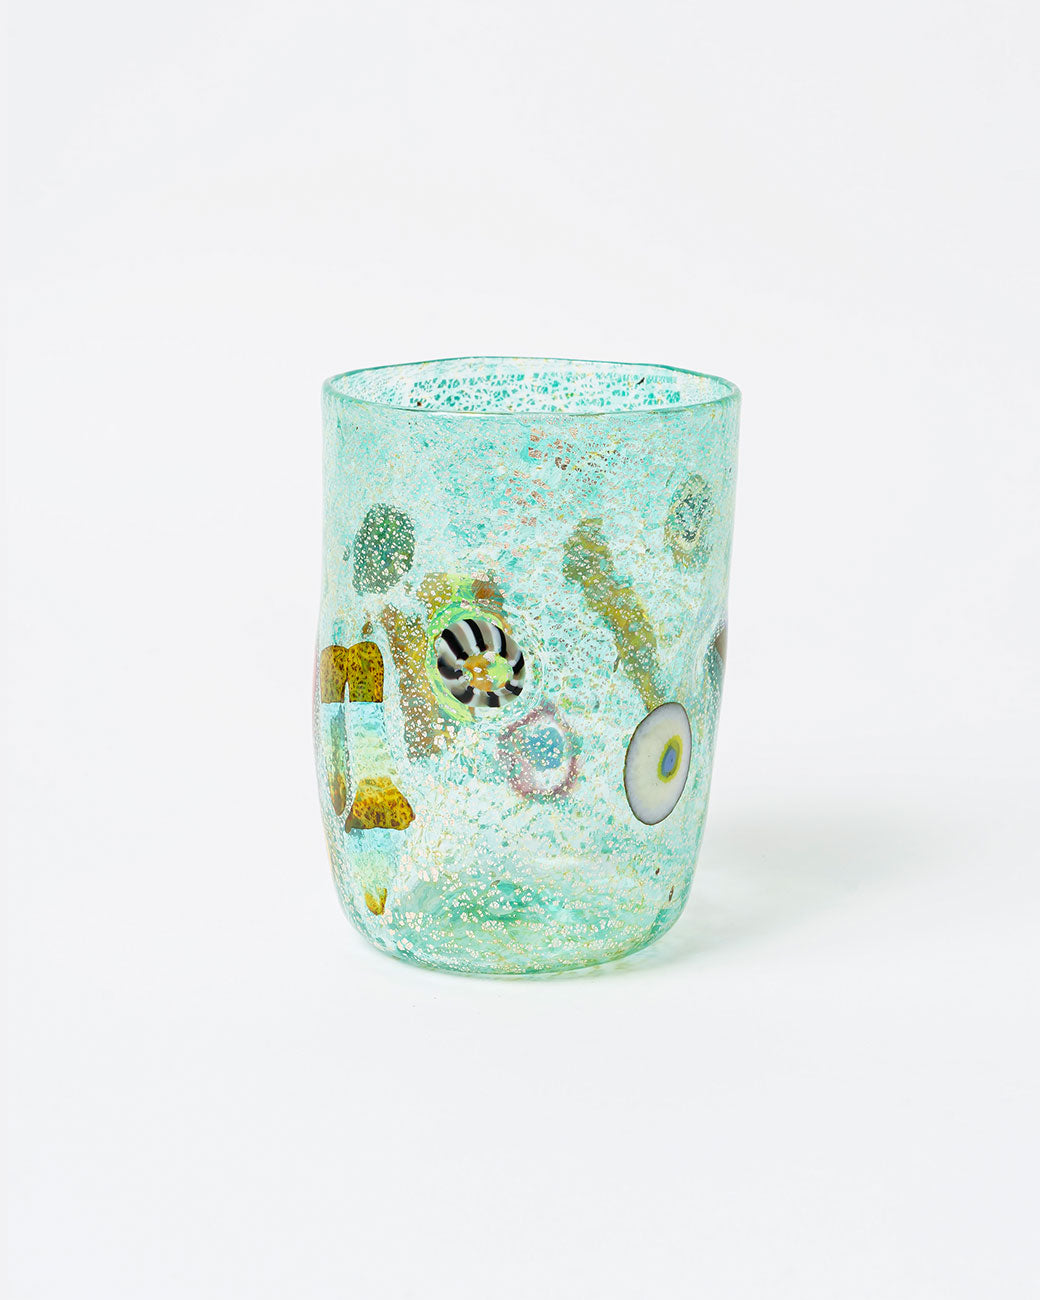 Green hand blown murano glass cup, shown from the front.